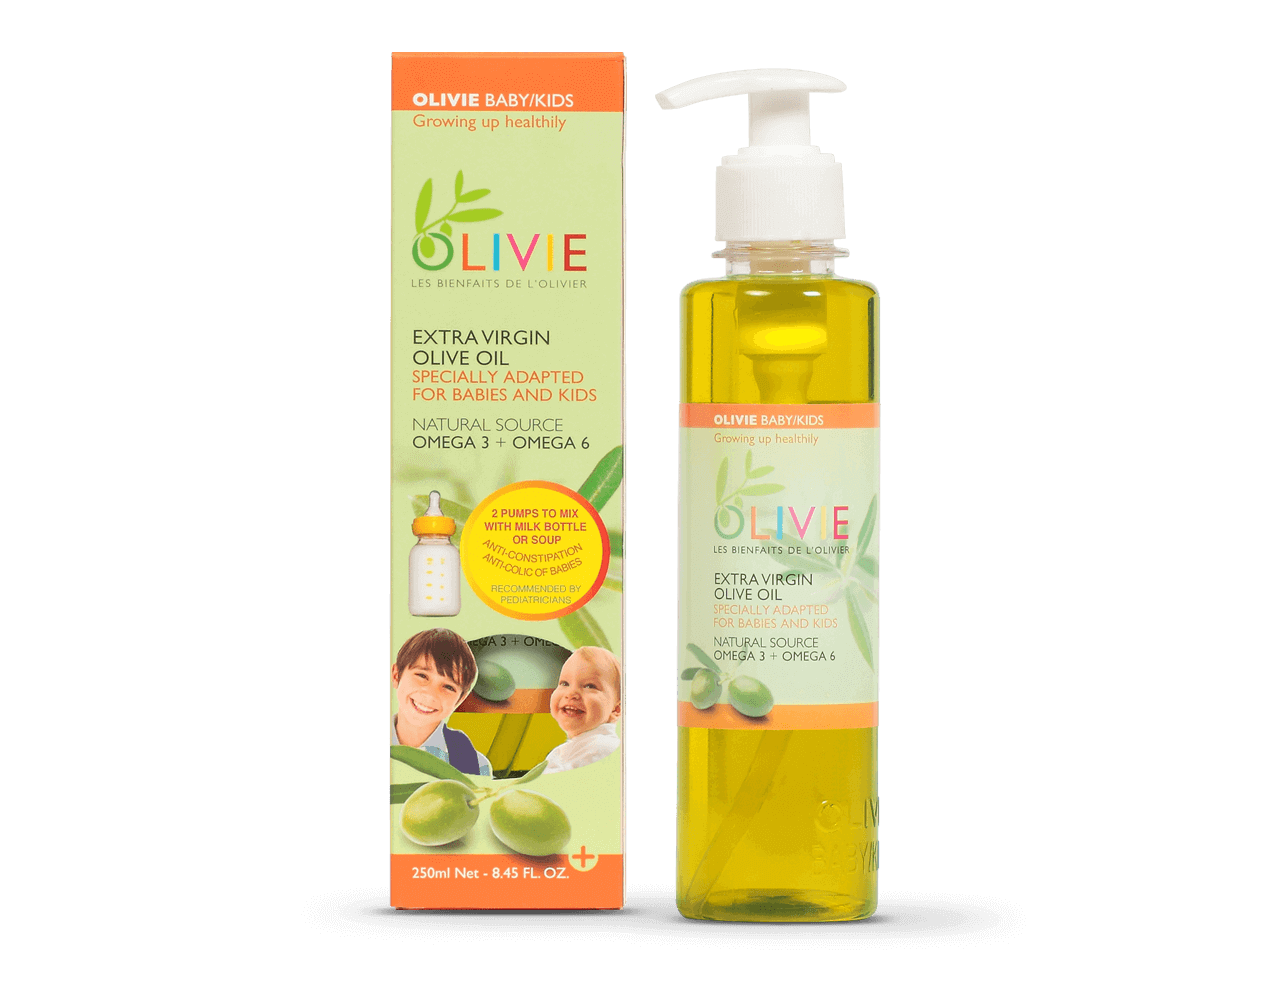 OLIVIE BABY/KIDS is an organic extra virgin olive oil for the little ones! Reduces babies colic.